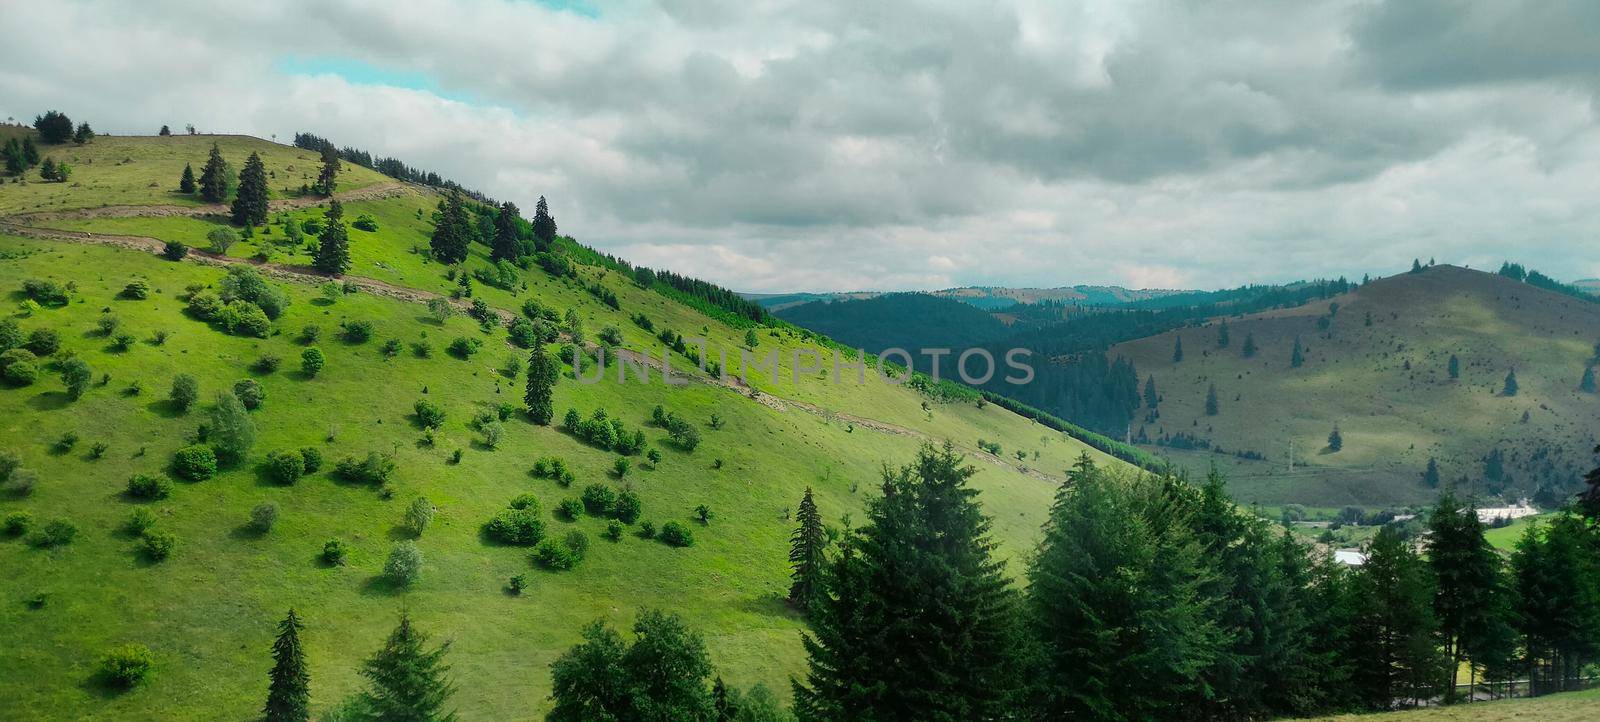 fir trees on meadow between hillsides with conifer forest by banate